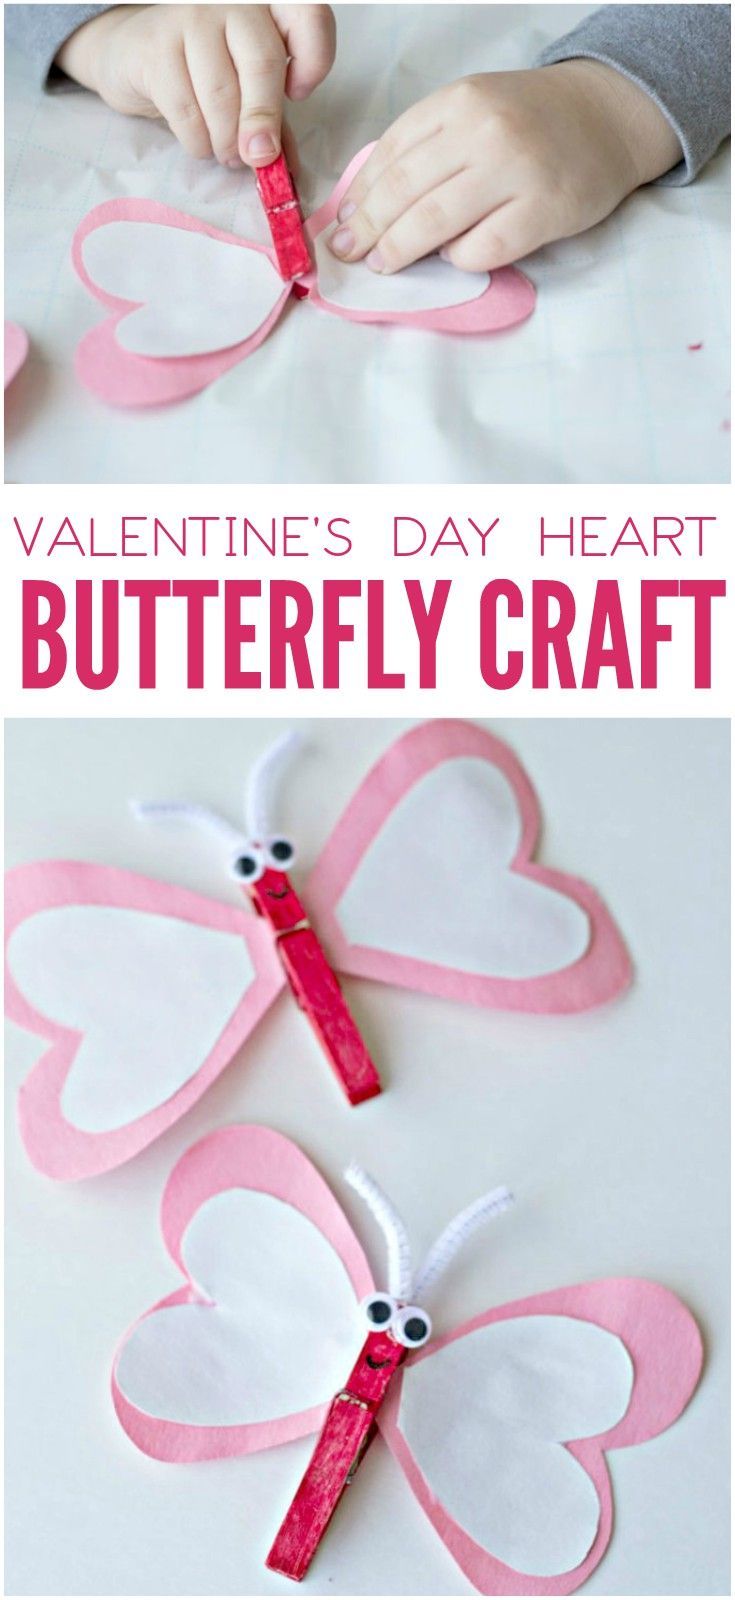 This heart butterfly craft for Valentine’s Day is so cute! With heart-shaped wings and red, pink and white colors, the kids will